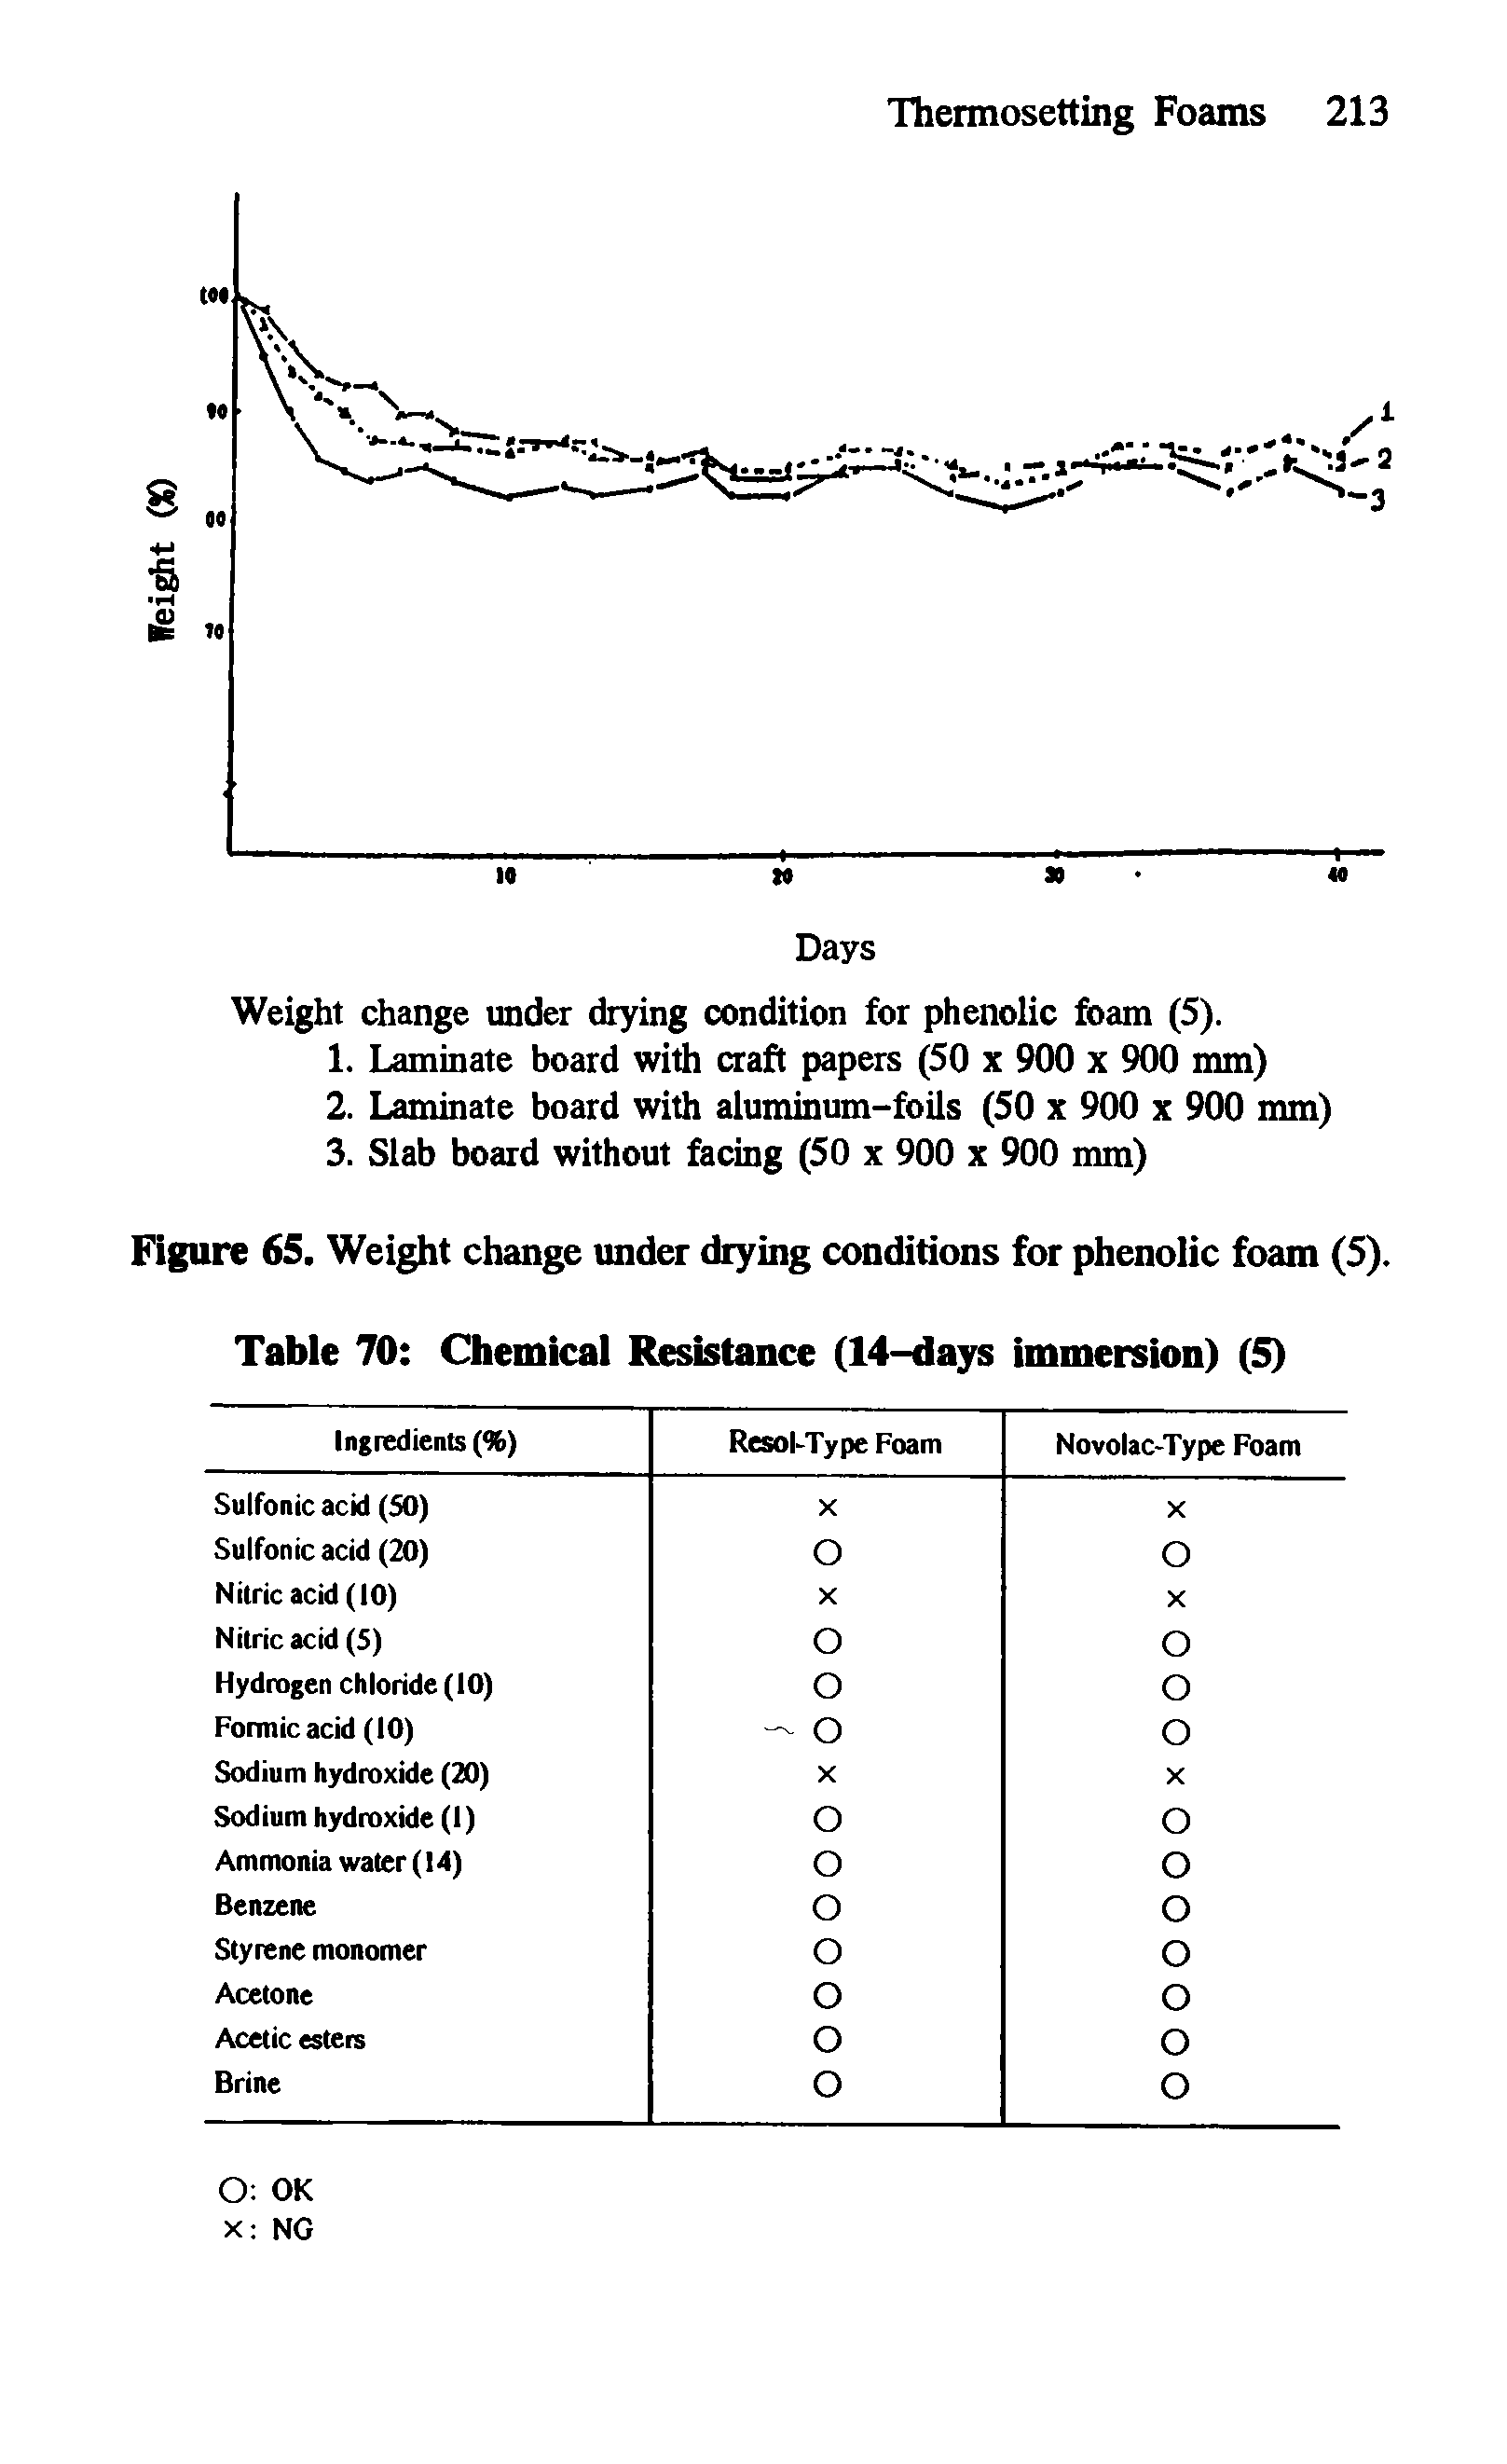 Figure 65. Weight change under drying conditions for phenolic foam (5). Table 70 Chemical Resistance (14-days immersion) (5)...